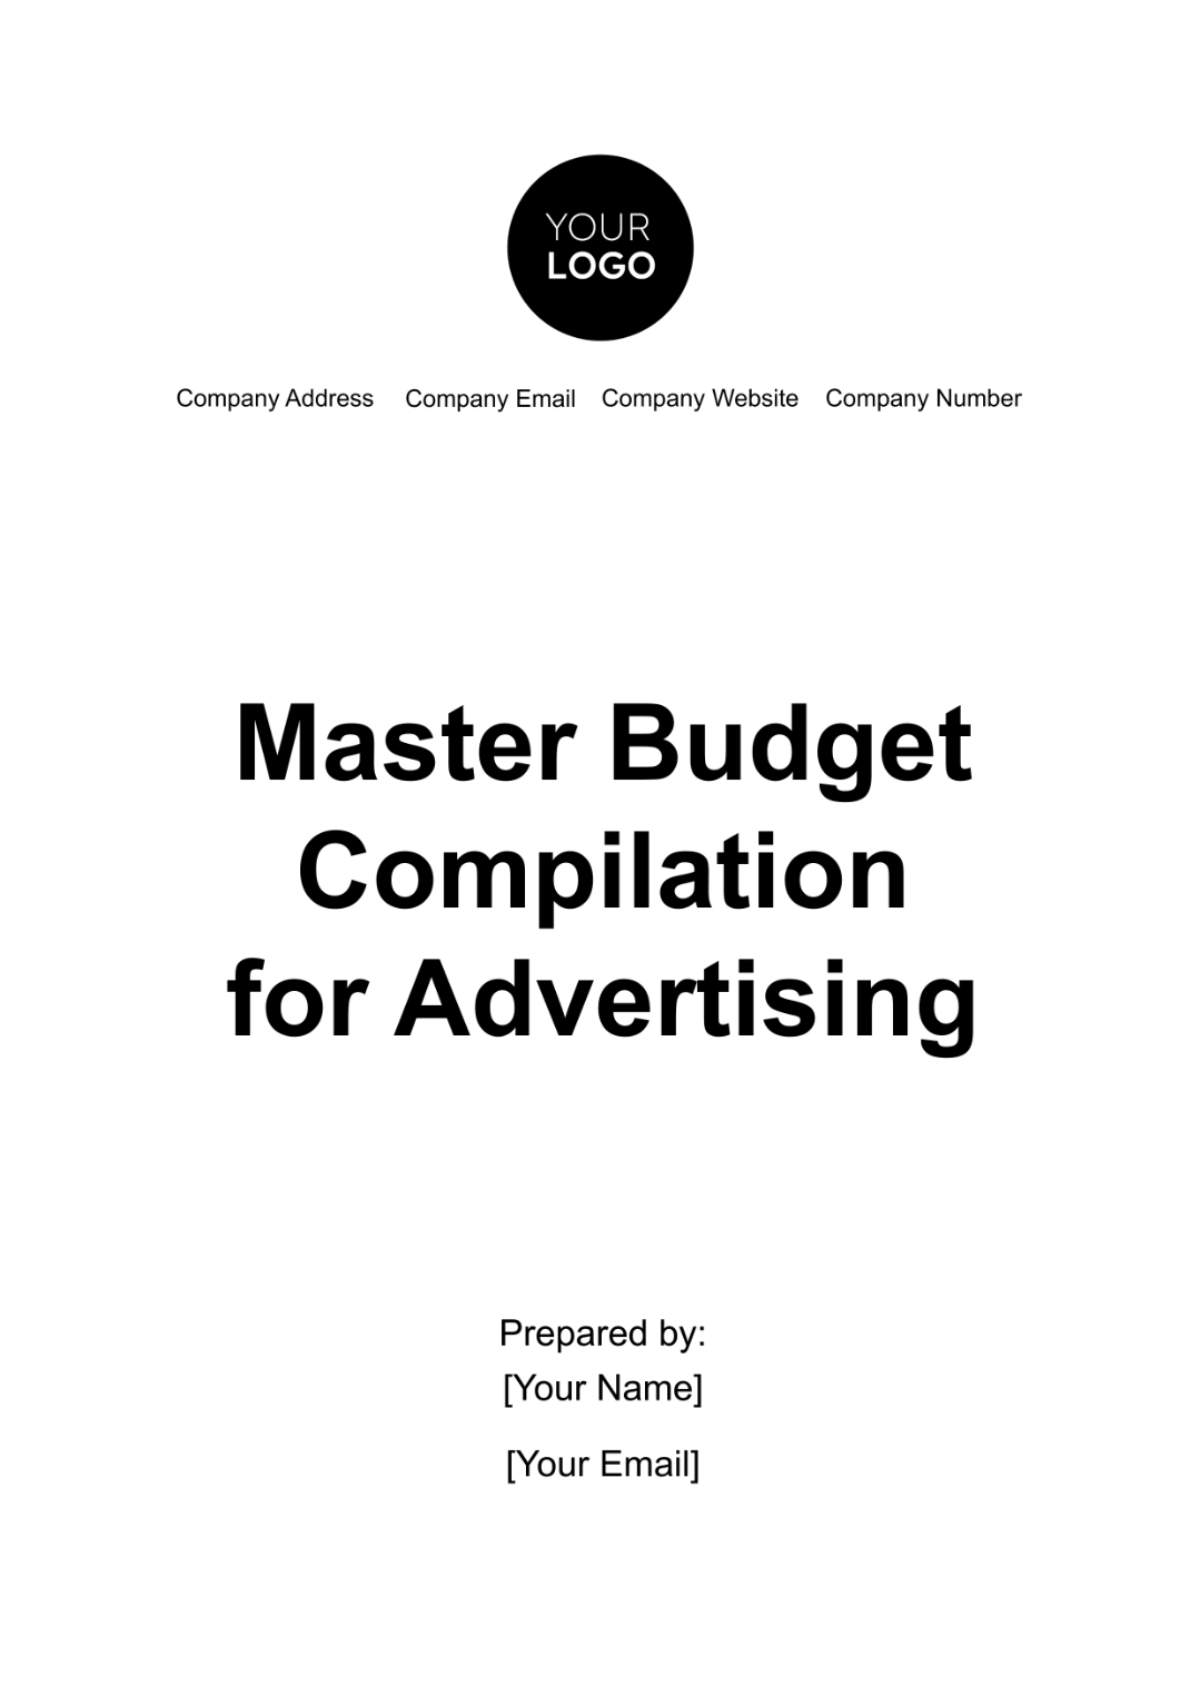 Free Master Budget Compilation for Advertising Template